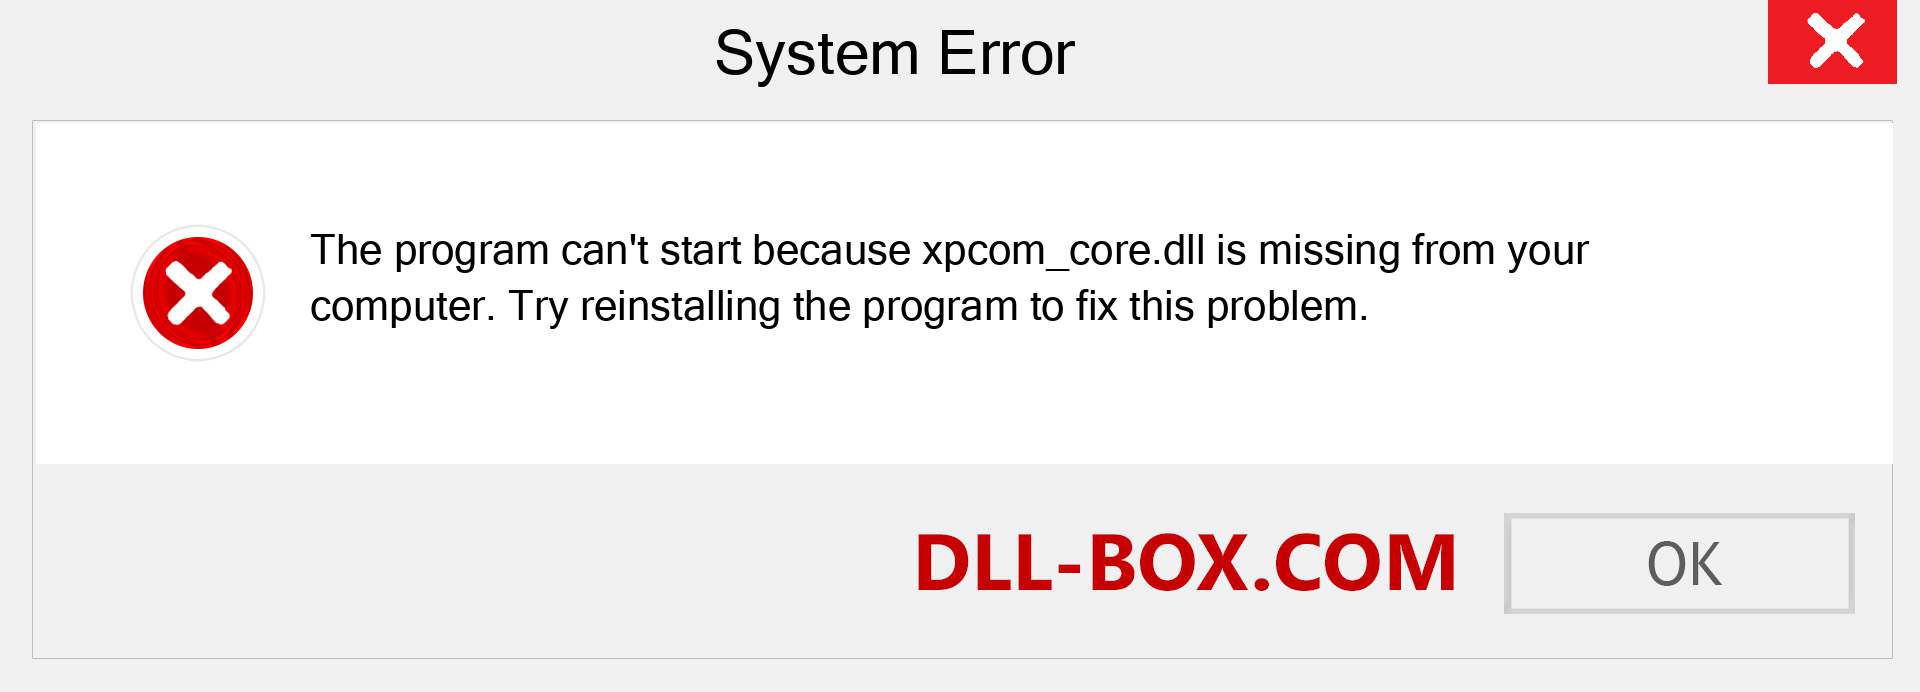  xpcom_core.dll file is missing?. Download for Windows 7, 8, 10 - Fix  xpcom_core dll Missing Error on Windows, photos, images